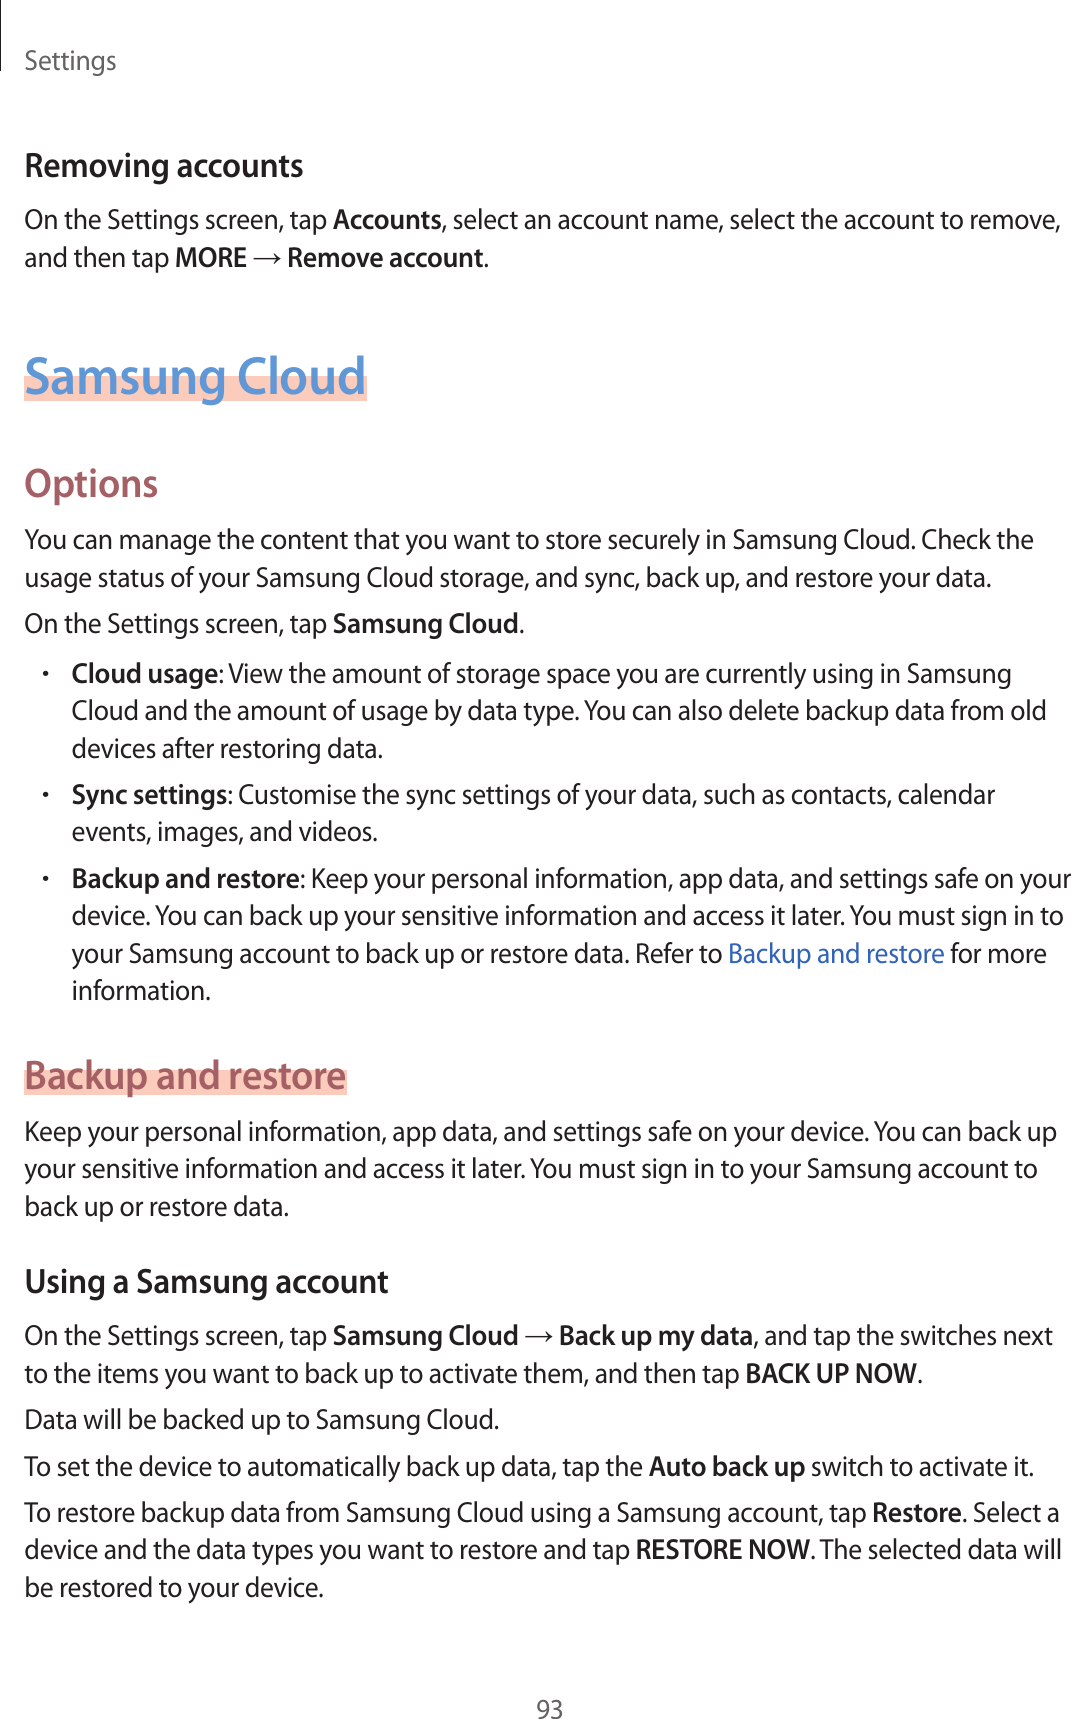 Settings93Removing accountsOn the Settings screen, tap Accounts, select an account name, select the account to remove, and then tap MORE → Remove account.Samsung CloudOptionsYou can manage the content that you want to store securely in Samsung Cloud. Check the usage status of your Samsung Cloud storage, and sync, back up, and restore your data.On the Settings screen, tap Samsung Cloud.•Cloud usage: View the amount of storage space you are currently using in Samsung Cloud and the amount of usage by data type. You can also delete backup data from old devices after restoring data.•Sync settings: Customise the sync settings of your data, such as contacts, calendar events, images, and videos.•Backup and restore: Keep your personal information, app data, and settings safe on your device. You can back up your sensitive information and access it later. You must sign in to your Samsung account to back up or restore data. Refer to Backup and restore for more information.Backup and restoreKeep your personal information, app data, and settings safe on your device. You can back up your sensitive information and access it later. You must sign in to your Samsung account to back up or restore data.Using a Samsung accountOn the Settings screen, tap Samsung Cloud → Back up my data, and tap the switches next to the items you want to back up to activate them, and then tap BACK UP NOW.Data will be backed up to Samsung Cloud.To set the device to automatically back up data, tap the Auto back up switch to activate it.To restore backup data from Samsung Cloud using a Samsung account, tap Restore. Select a device and the data types you want to restore and tap RESTORE NOW. The selected data will be restored to your device.